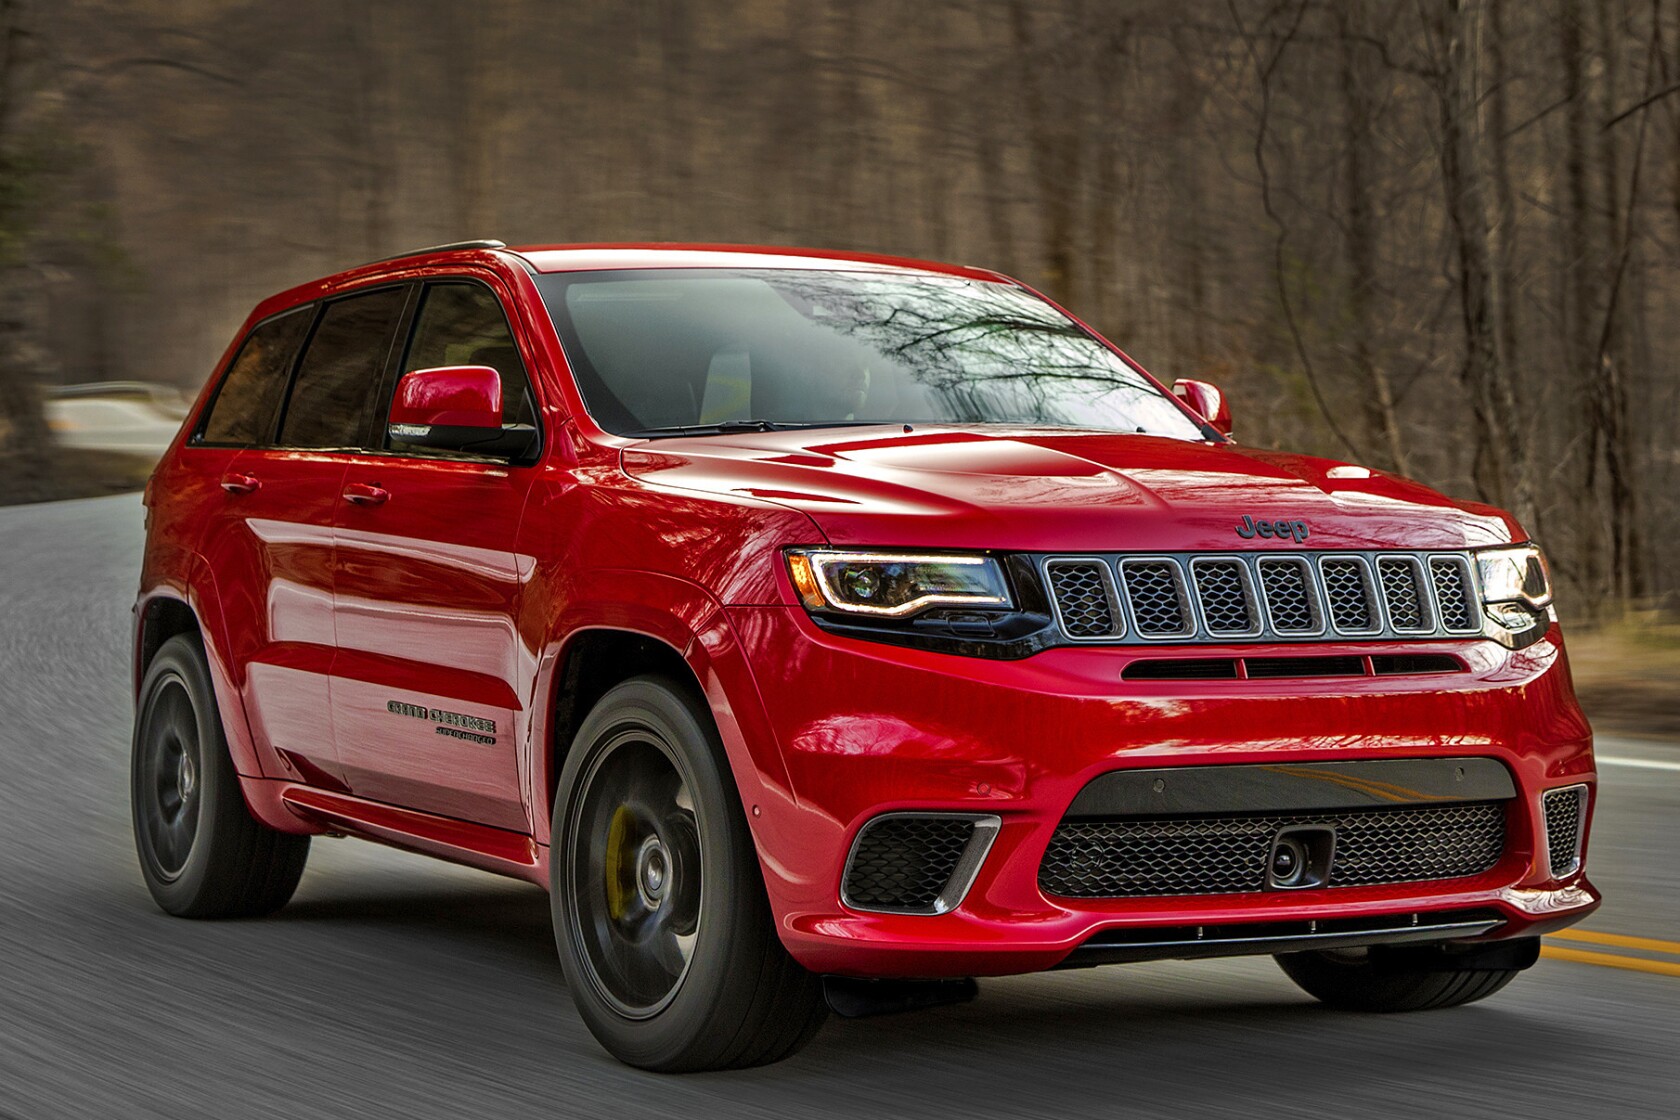 Review: 2018 Jeep Grand Cherokee Trackhawk: Powerful and preposterous